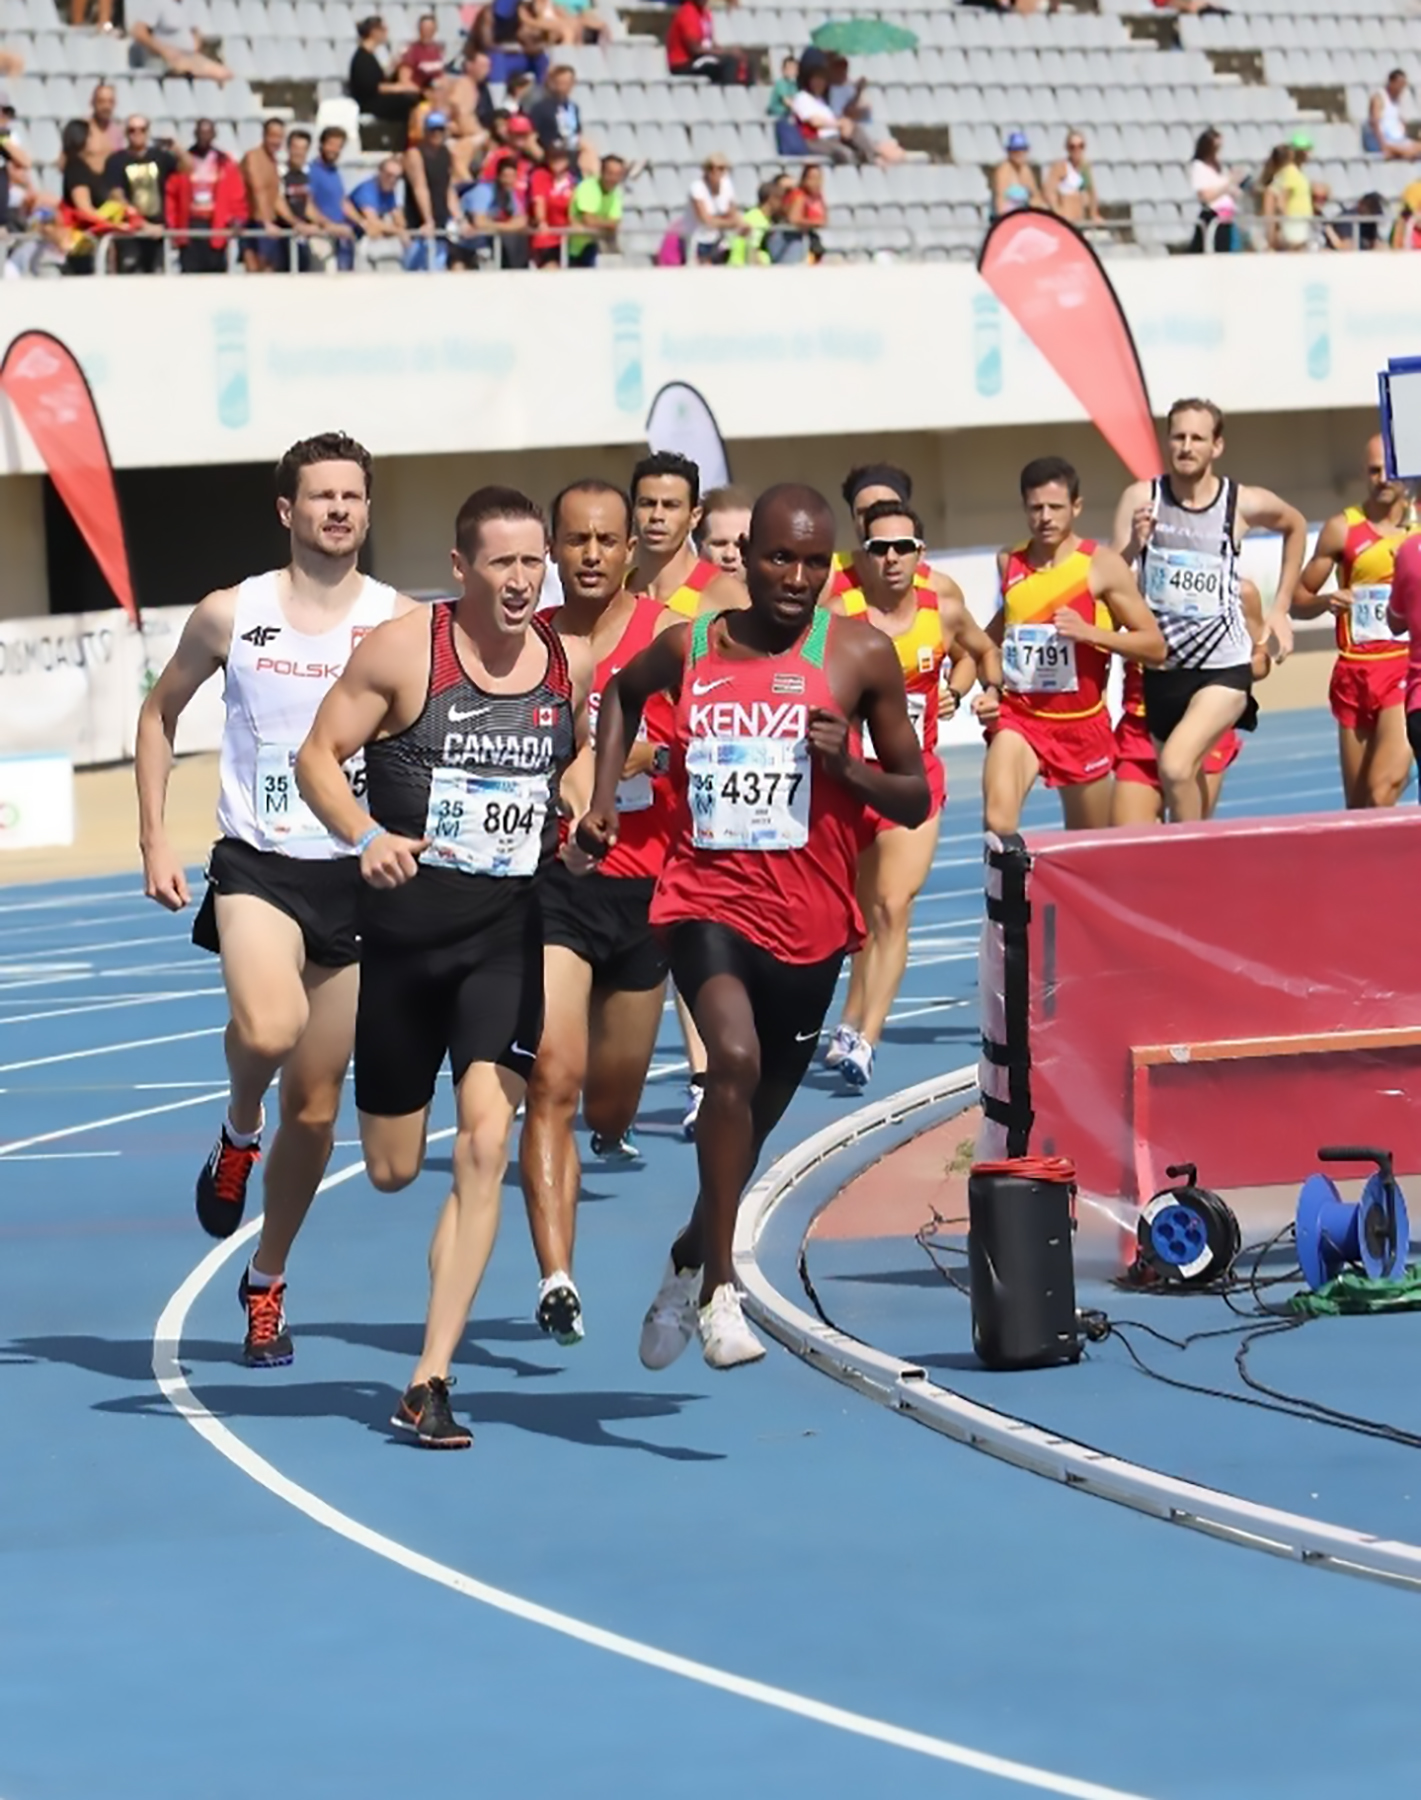 A group of male runners race on an oval track in front of spectators.